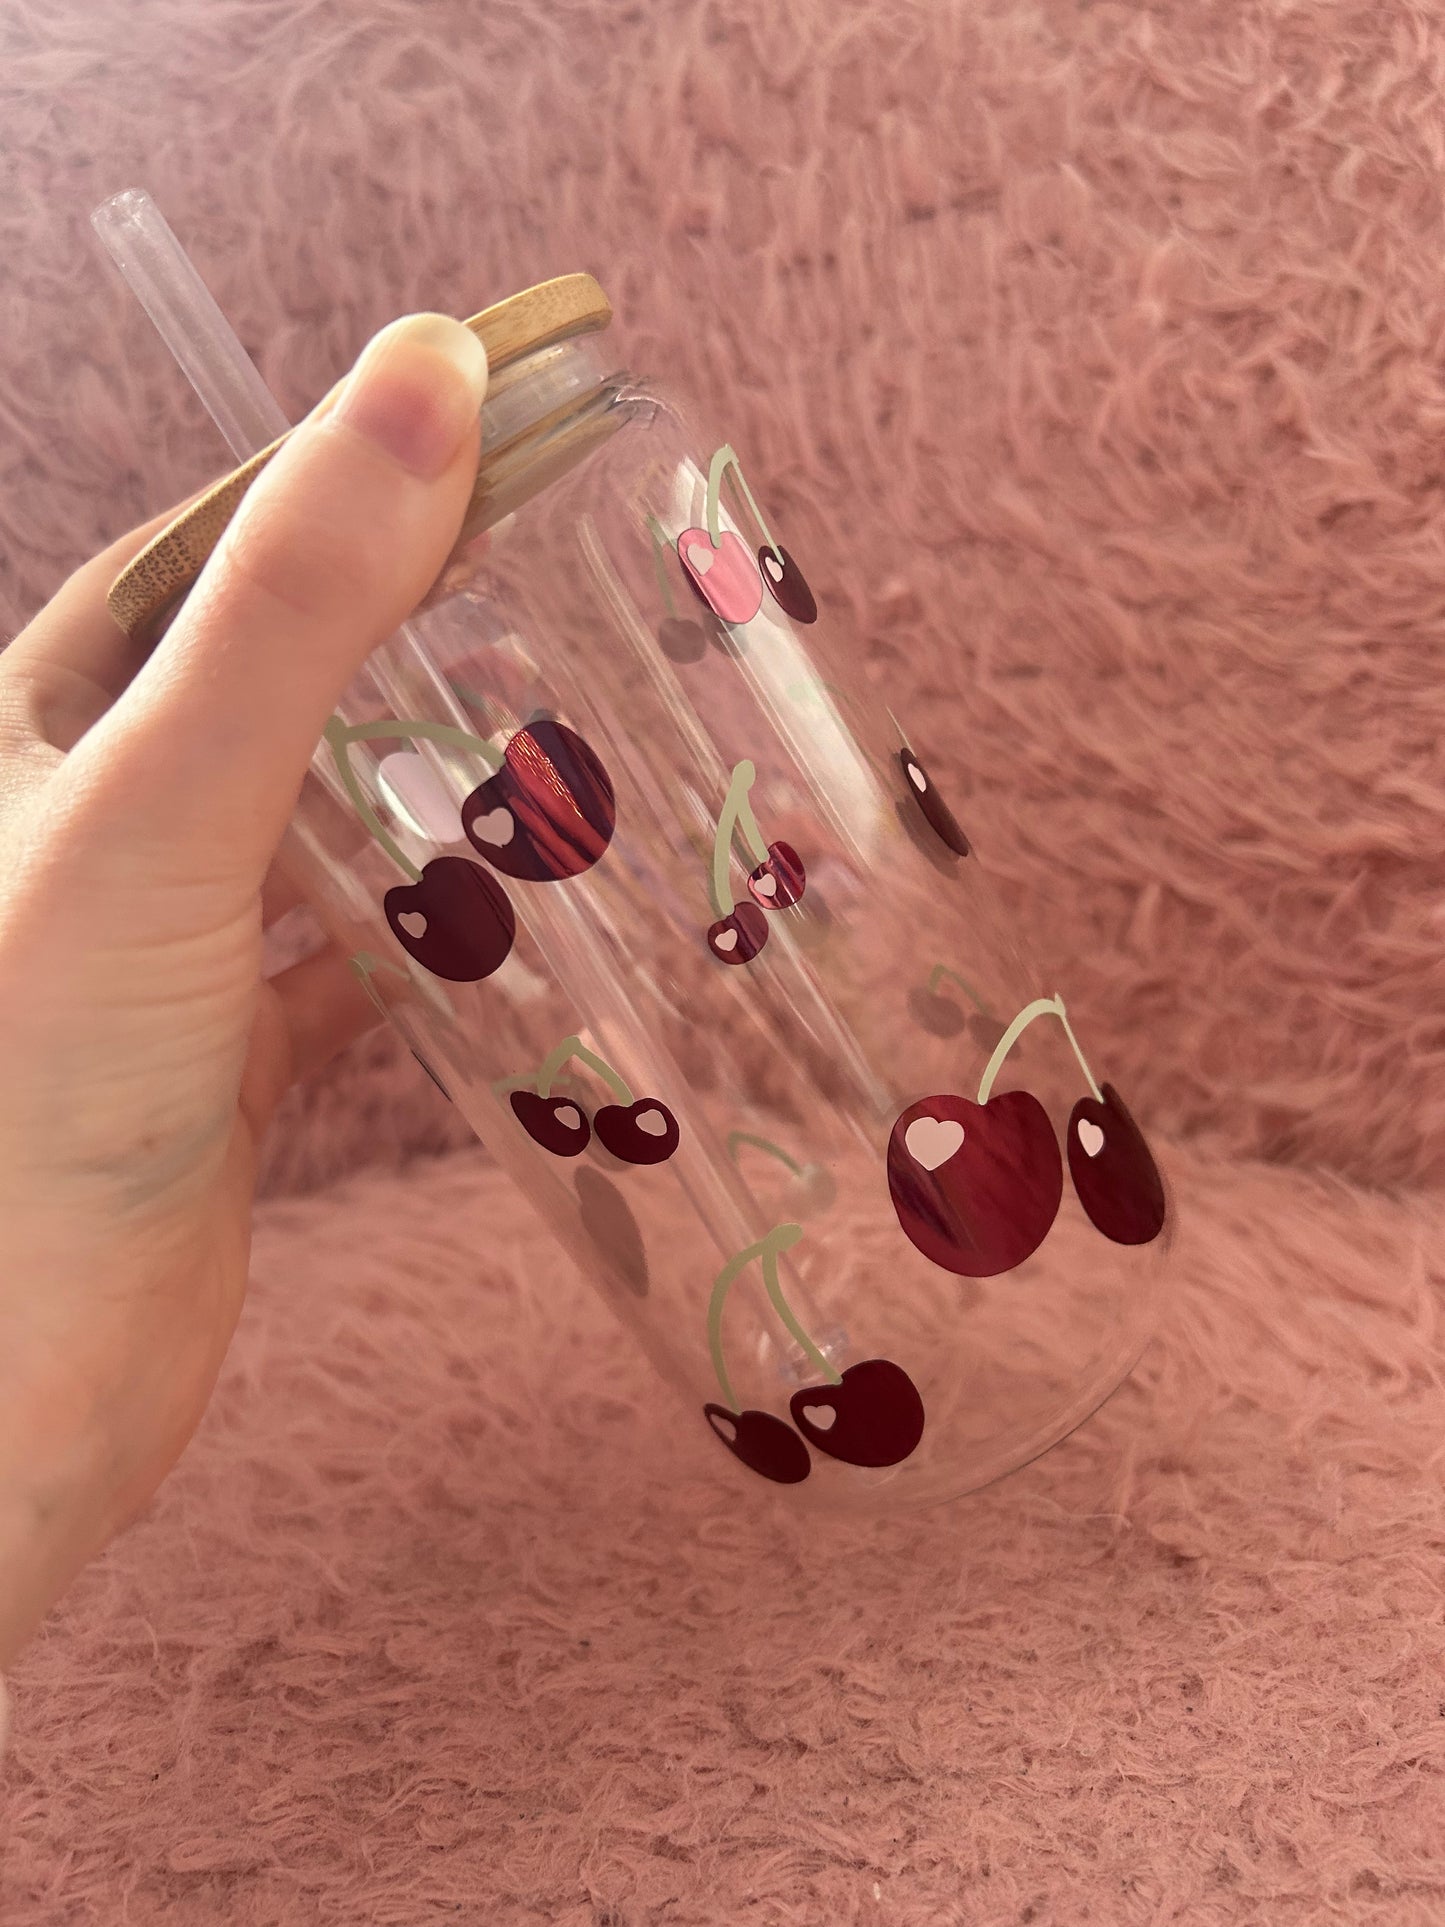 Cherry glass can